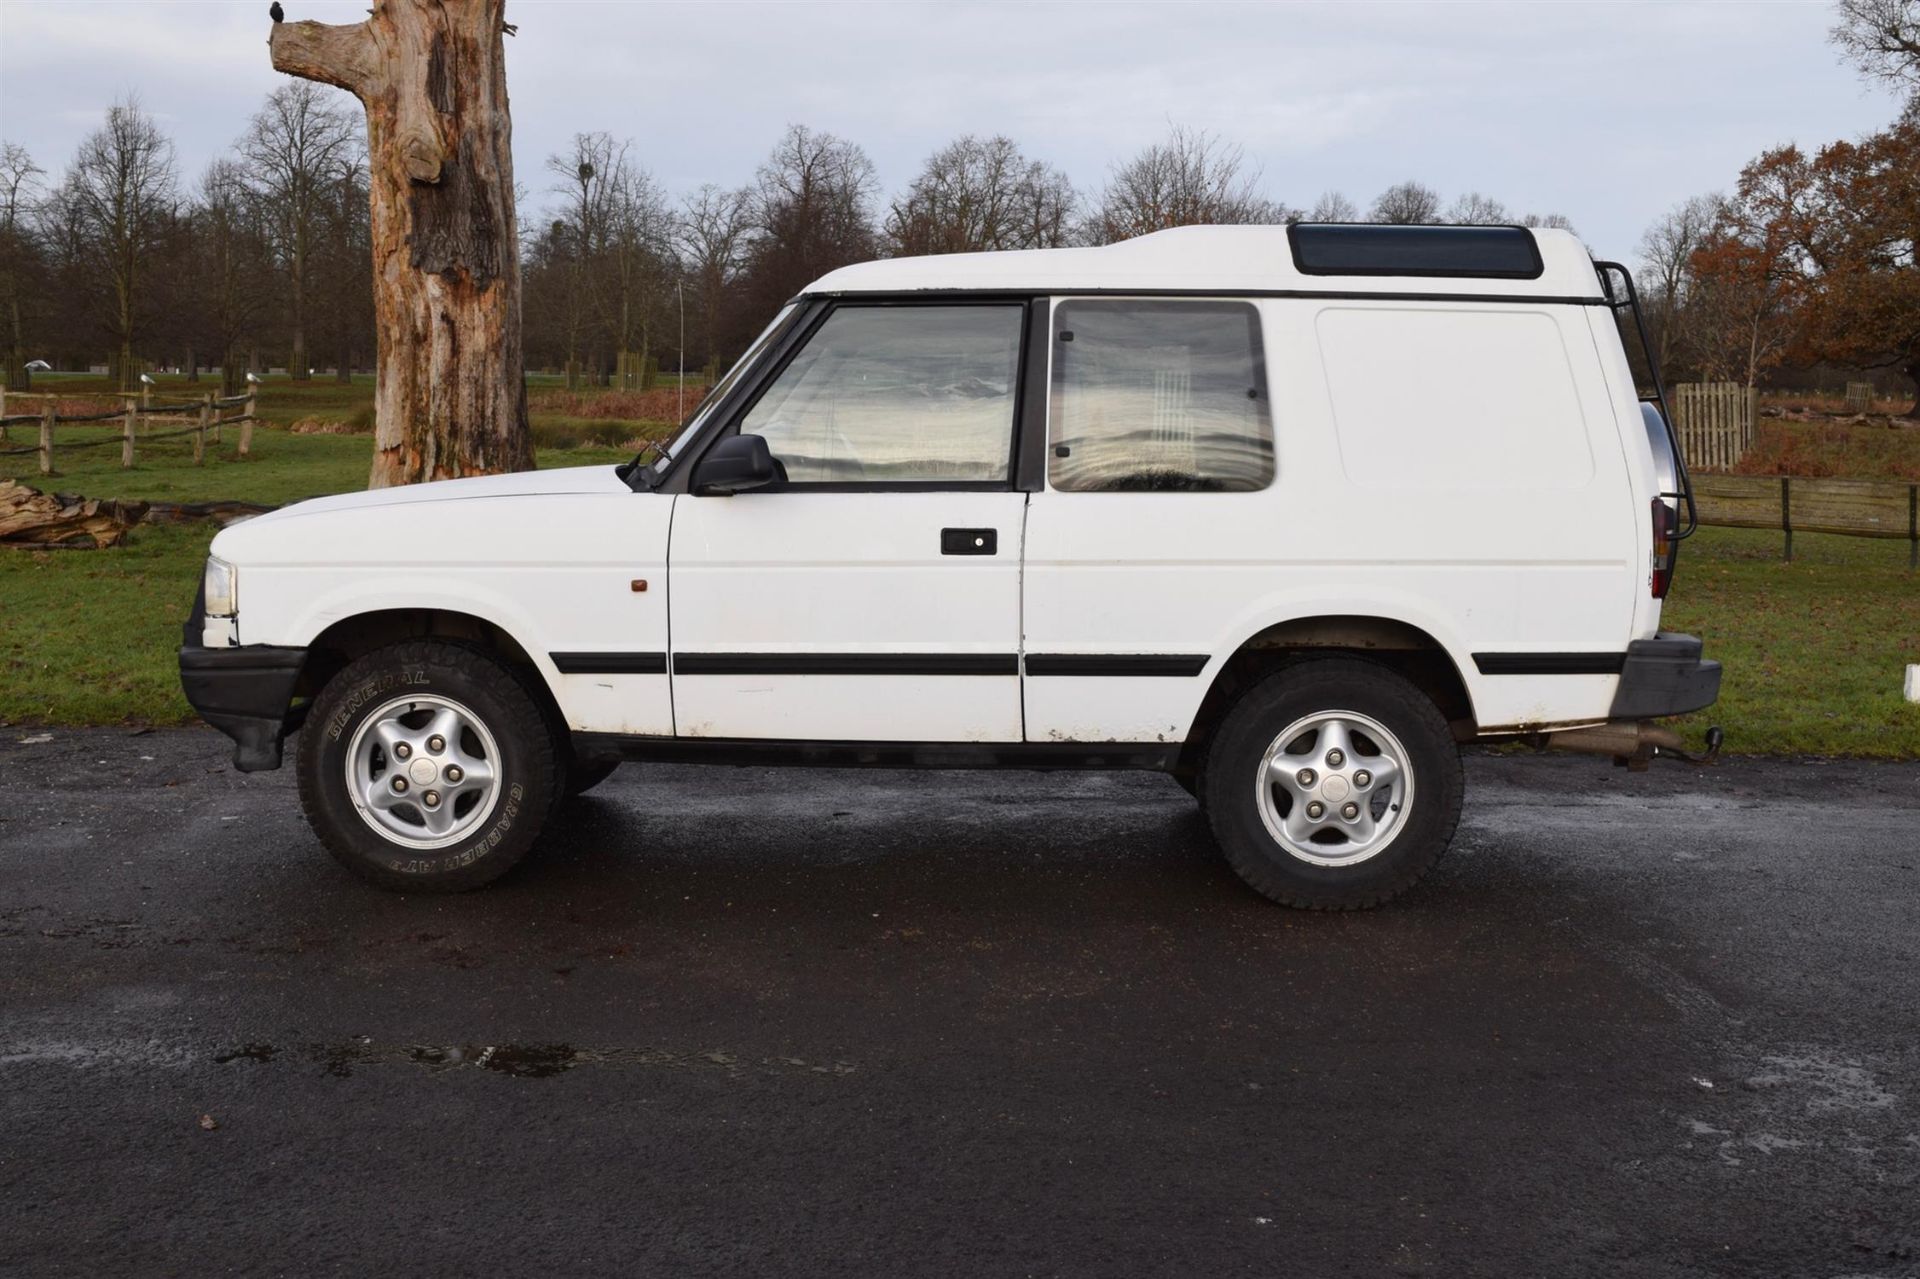 1998 Land Rover Discovery 2-Door R41 KAA. 2-door Land Rover Discovery 300 TDI, which was first - Image 33 of 41